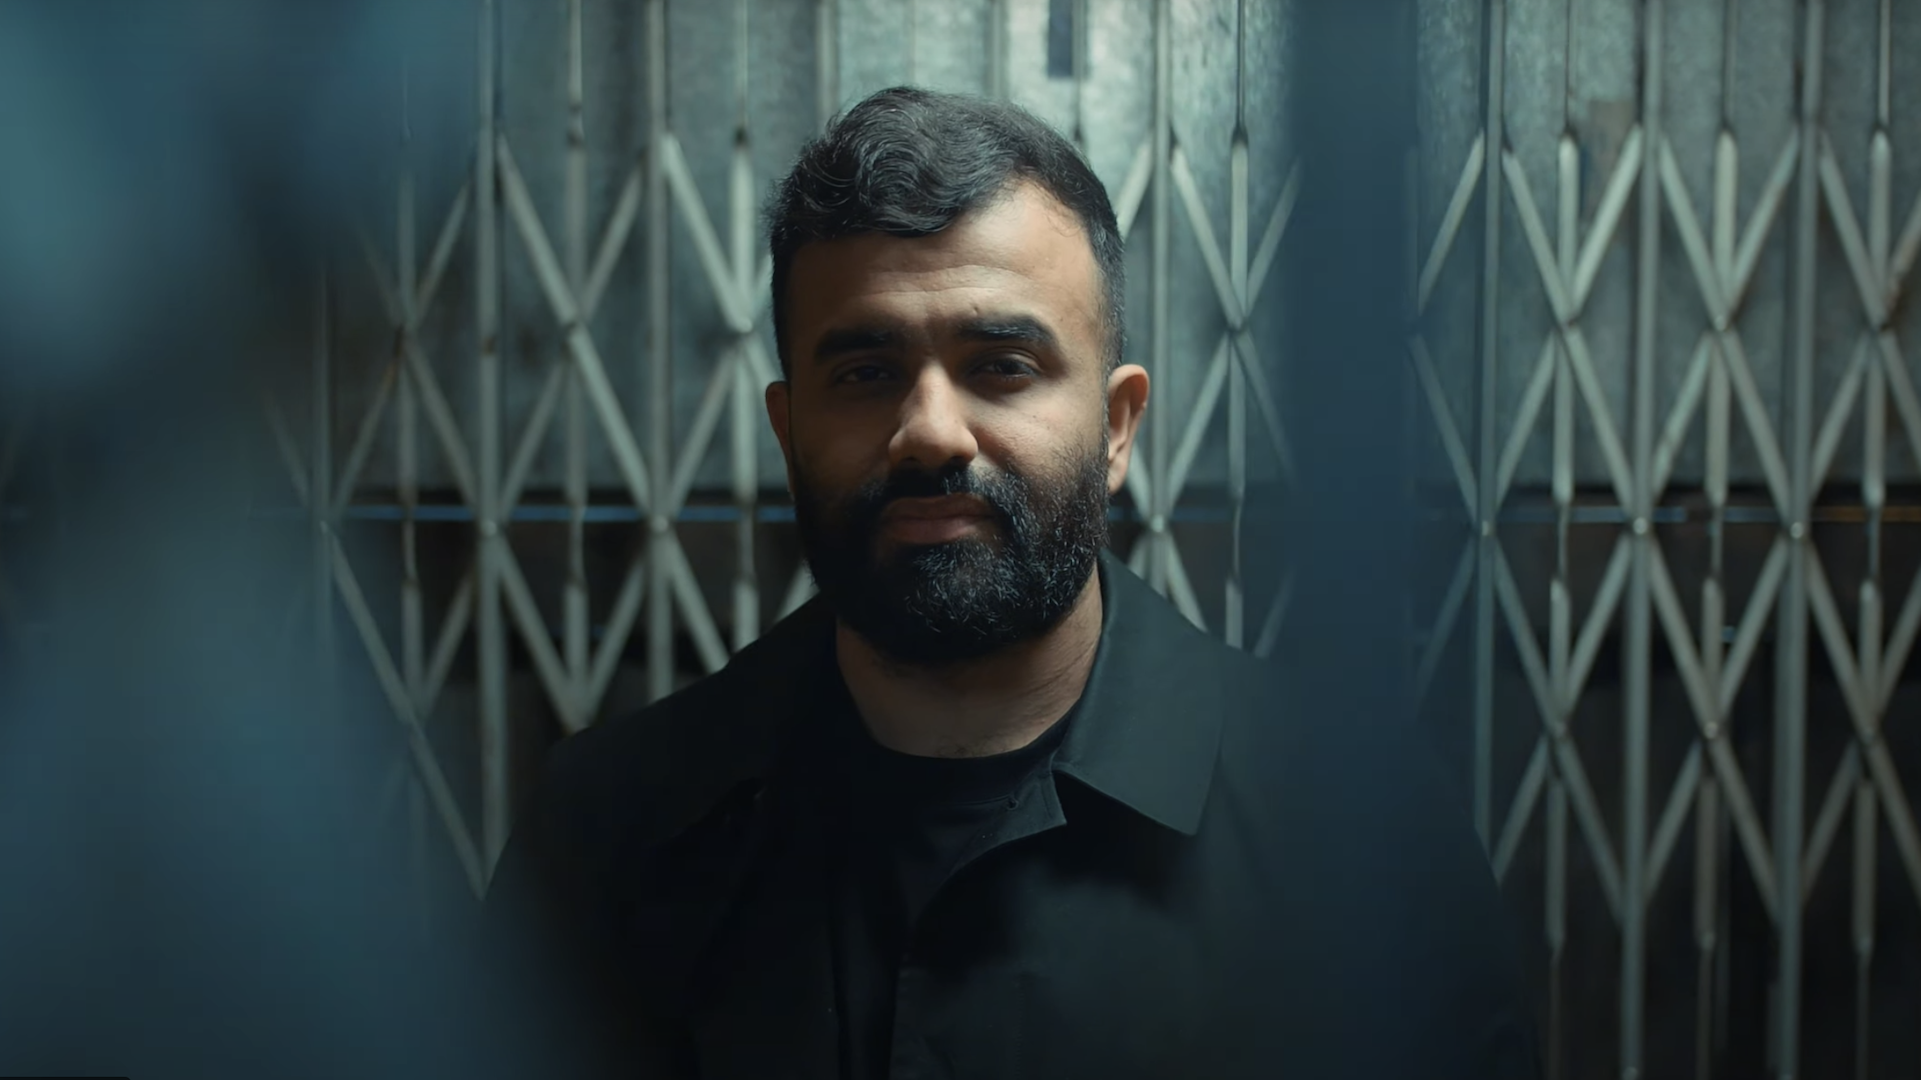 Poet Hussain Manawer has teamed up with Movember for World Suicide Prevention Day